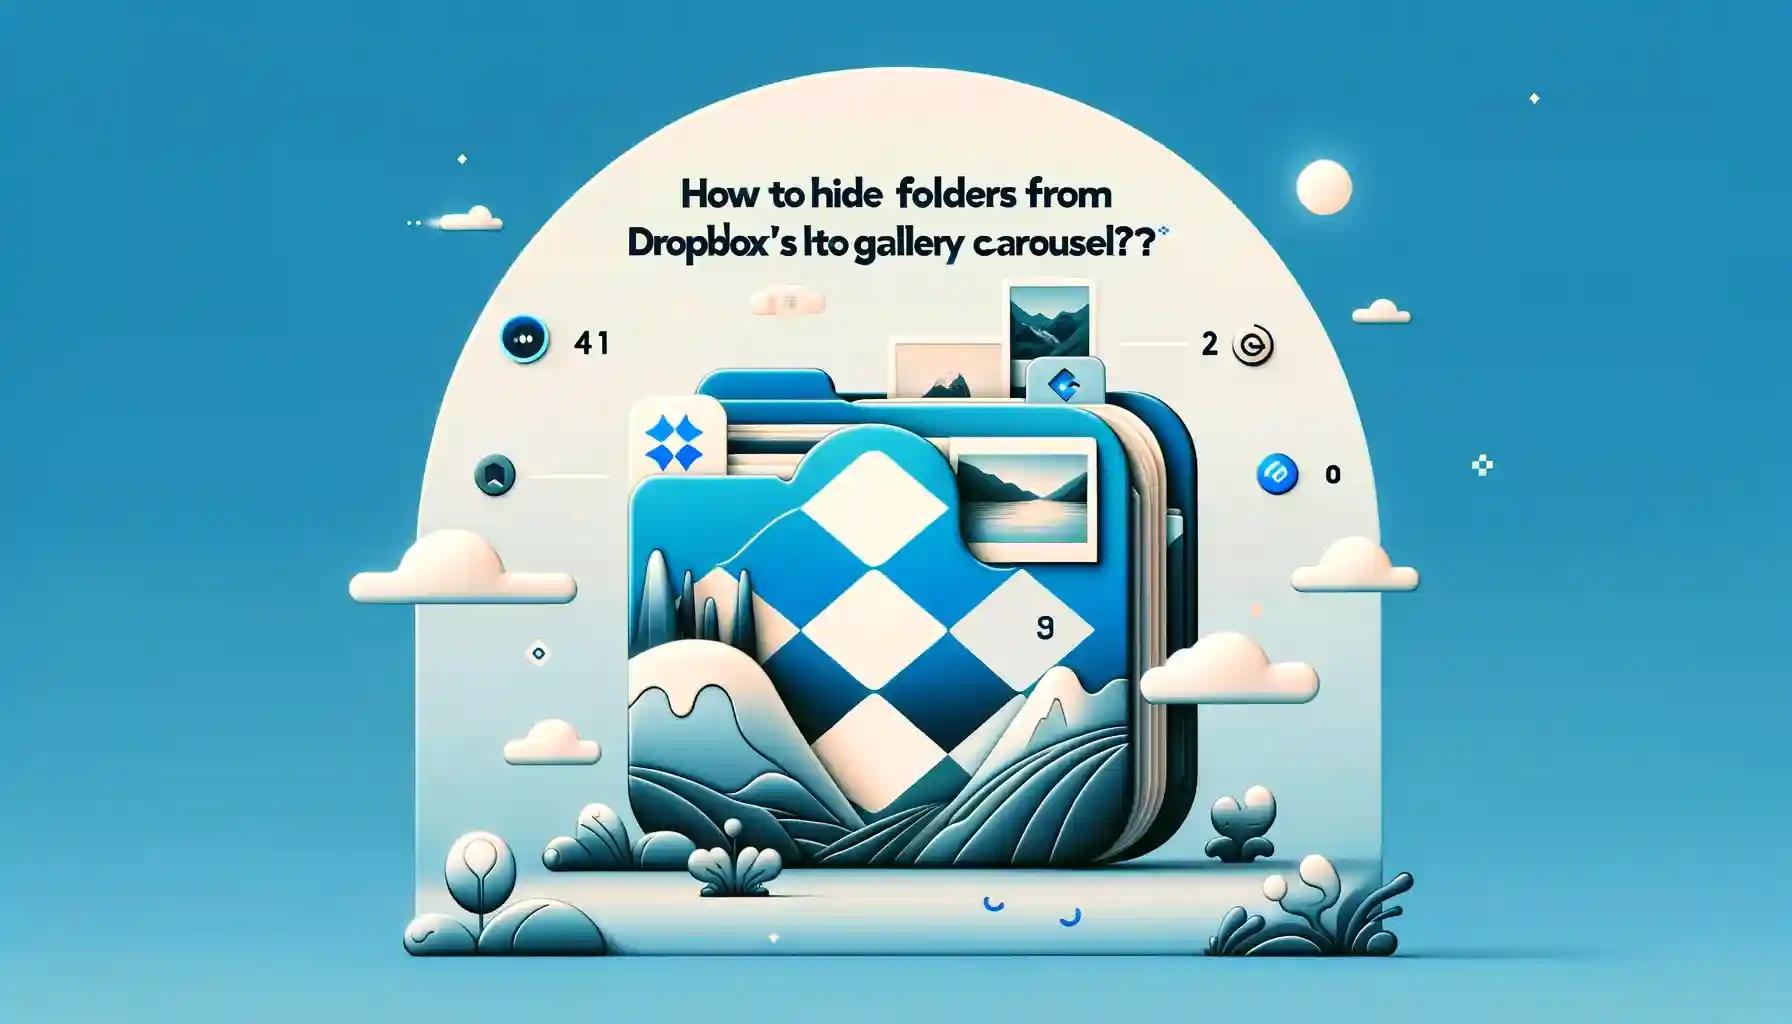 How to Hide Folders from Dropbox's Photo Gallery Carousel?